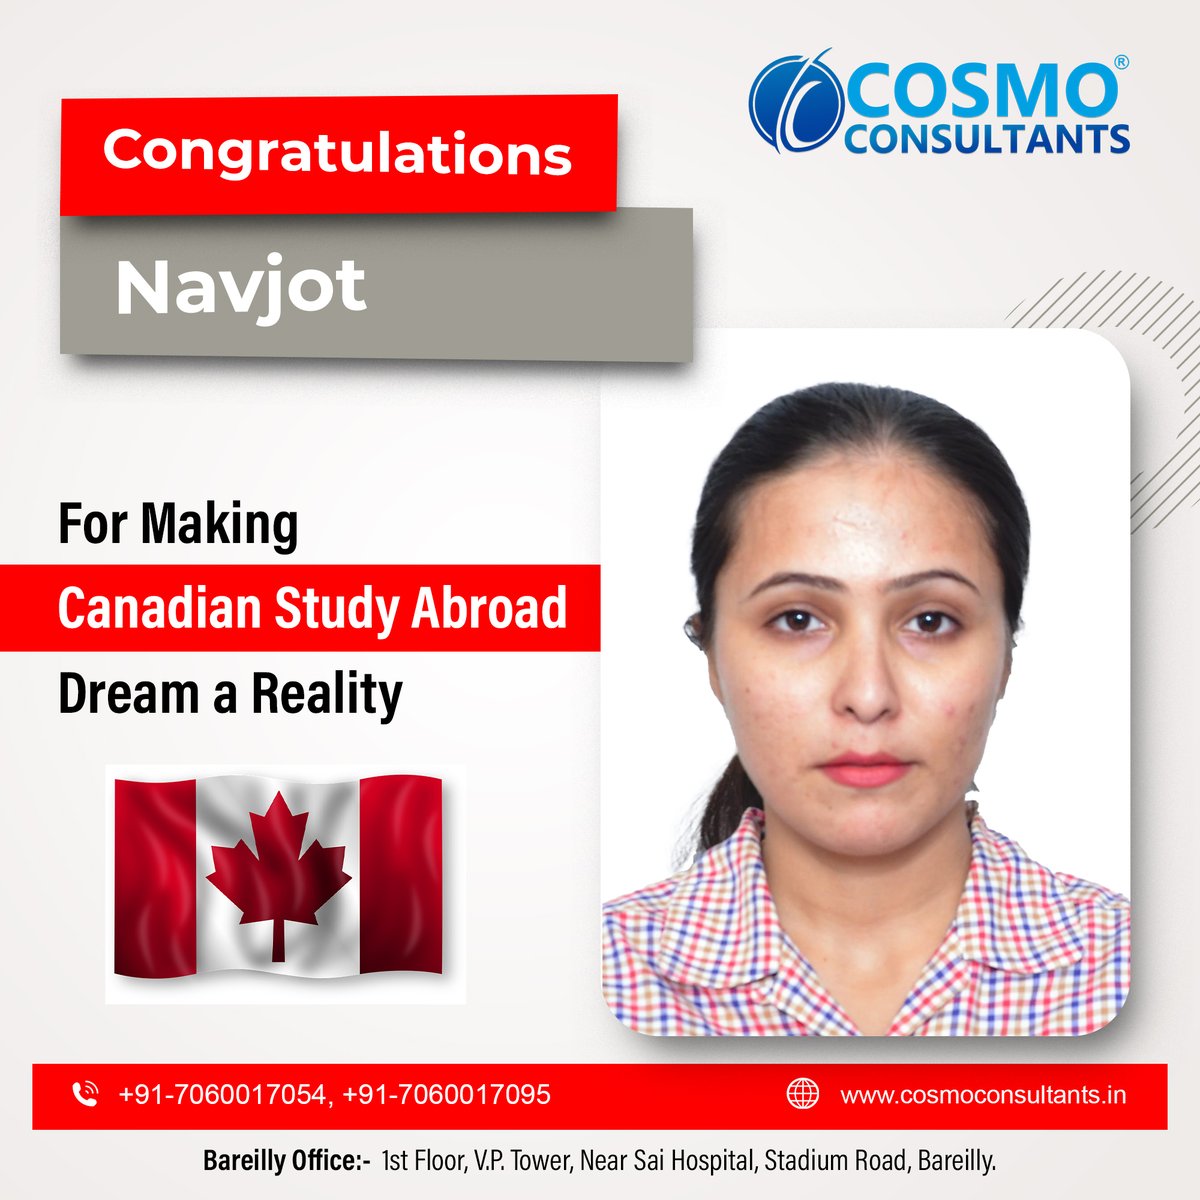 Congratulations 𝐌𝐢𝐬𝐬. 𝐍𝐚𝐯𝐣𝐨𝐭 for your study journey in Canada. Cosmo Consultants wishes you a very bright and successful career ahead.
For more information reach us: +91-7060017054, +91-7060017095.

#CosmoConsultants #Canada #StudyInCanada #StudyAbroad #studentvisa